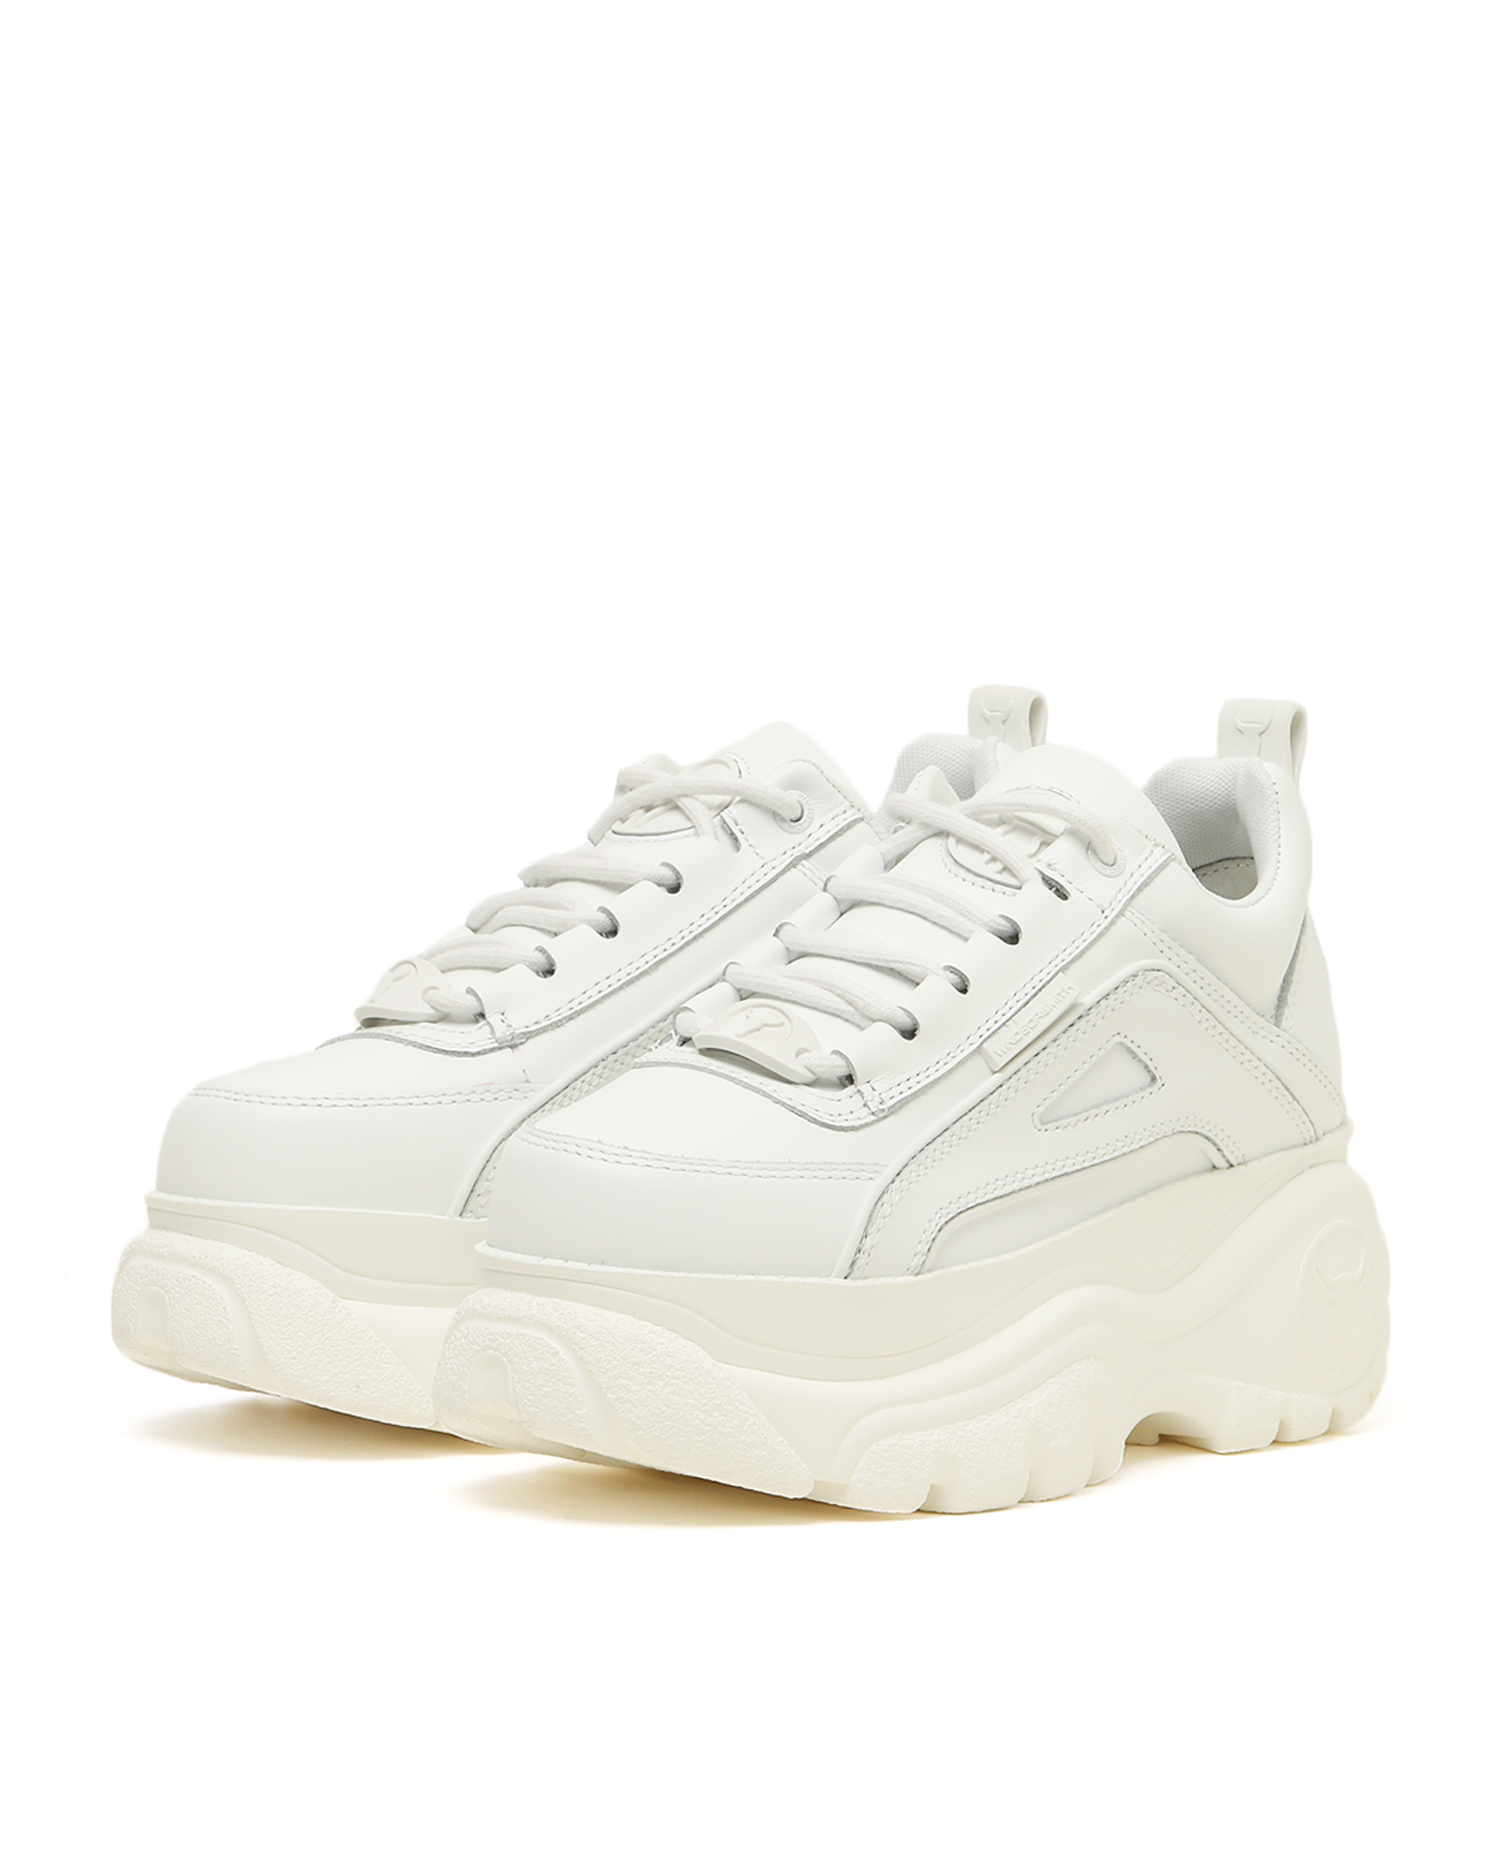 windsor smith lupe sneaker white